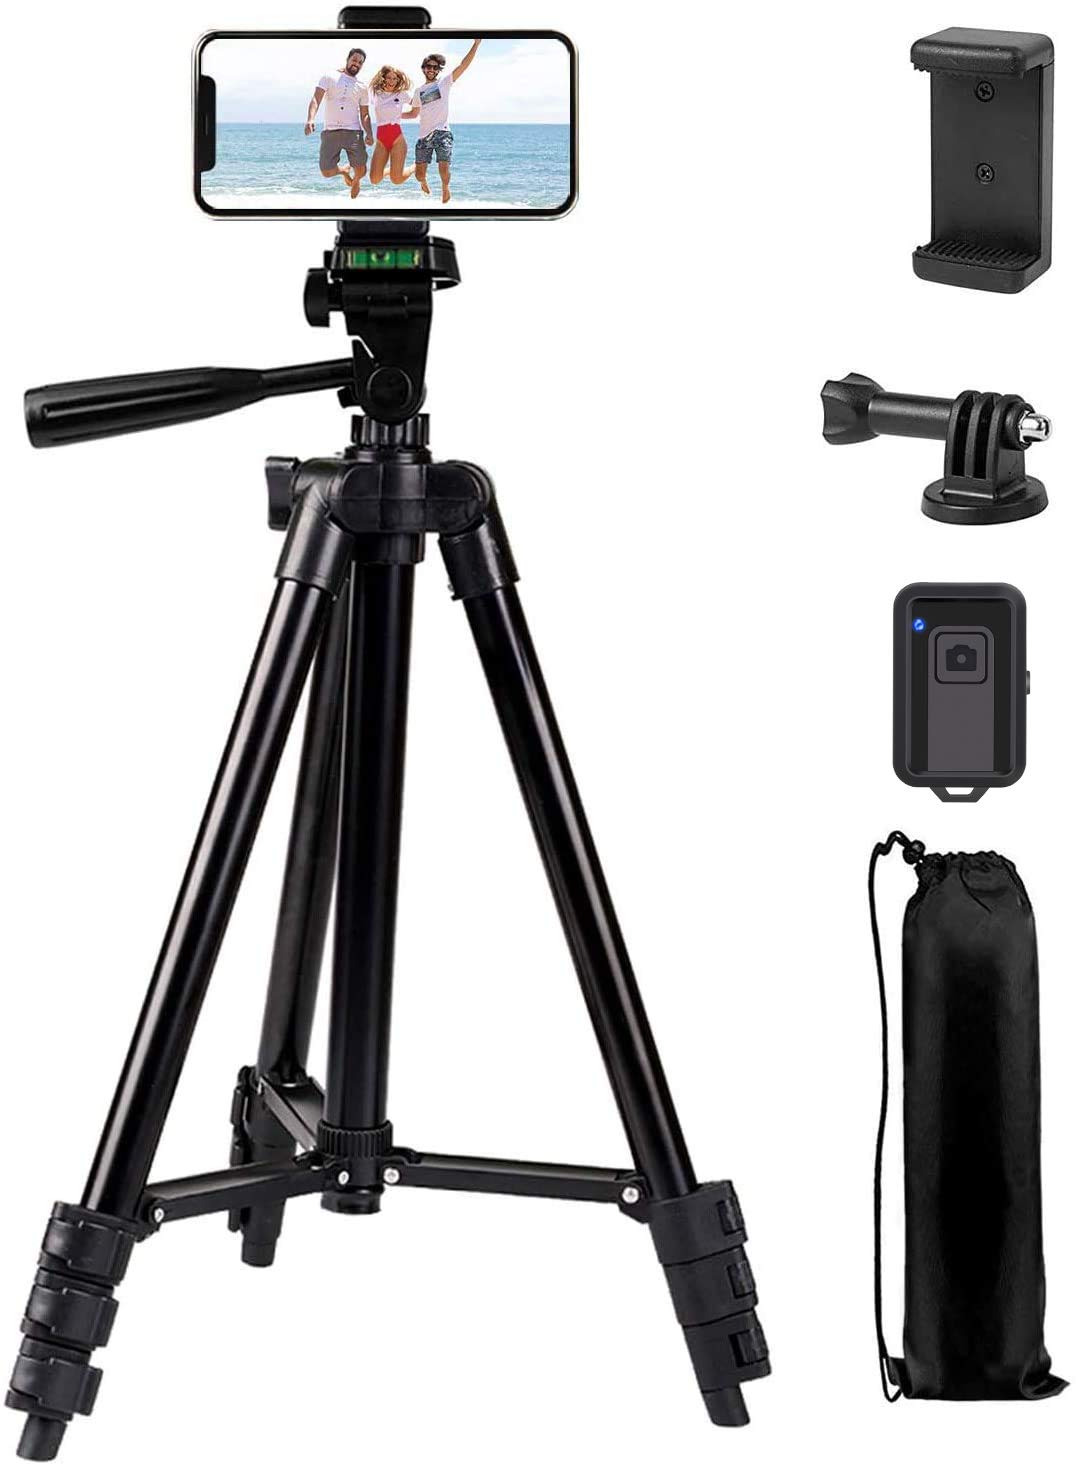 Phone Tripod,LINKCOOL 42" Aluminum Lightweight Portable Camera Tripod for iPhone/Samsung/Smartphone/Action Camera/DSLR Camera with Phone Holder & Wireless Bluetooth Control Remote